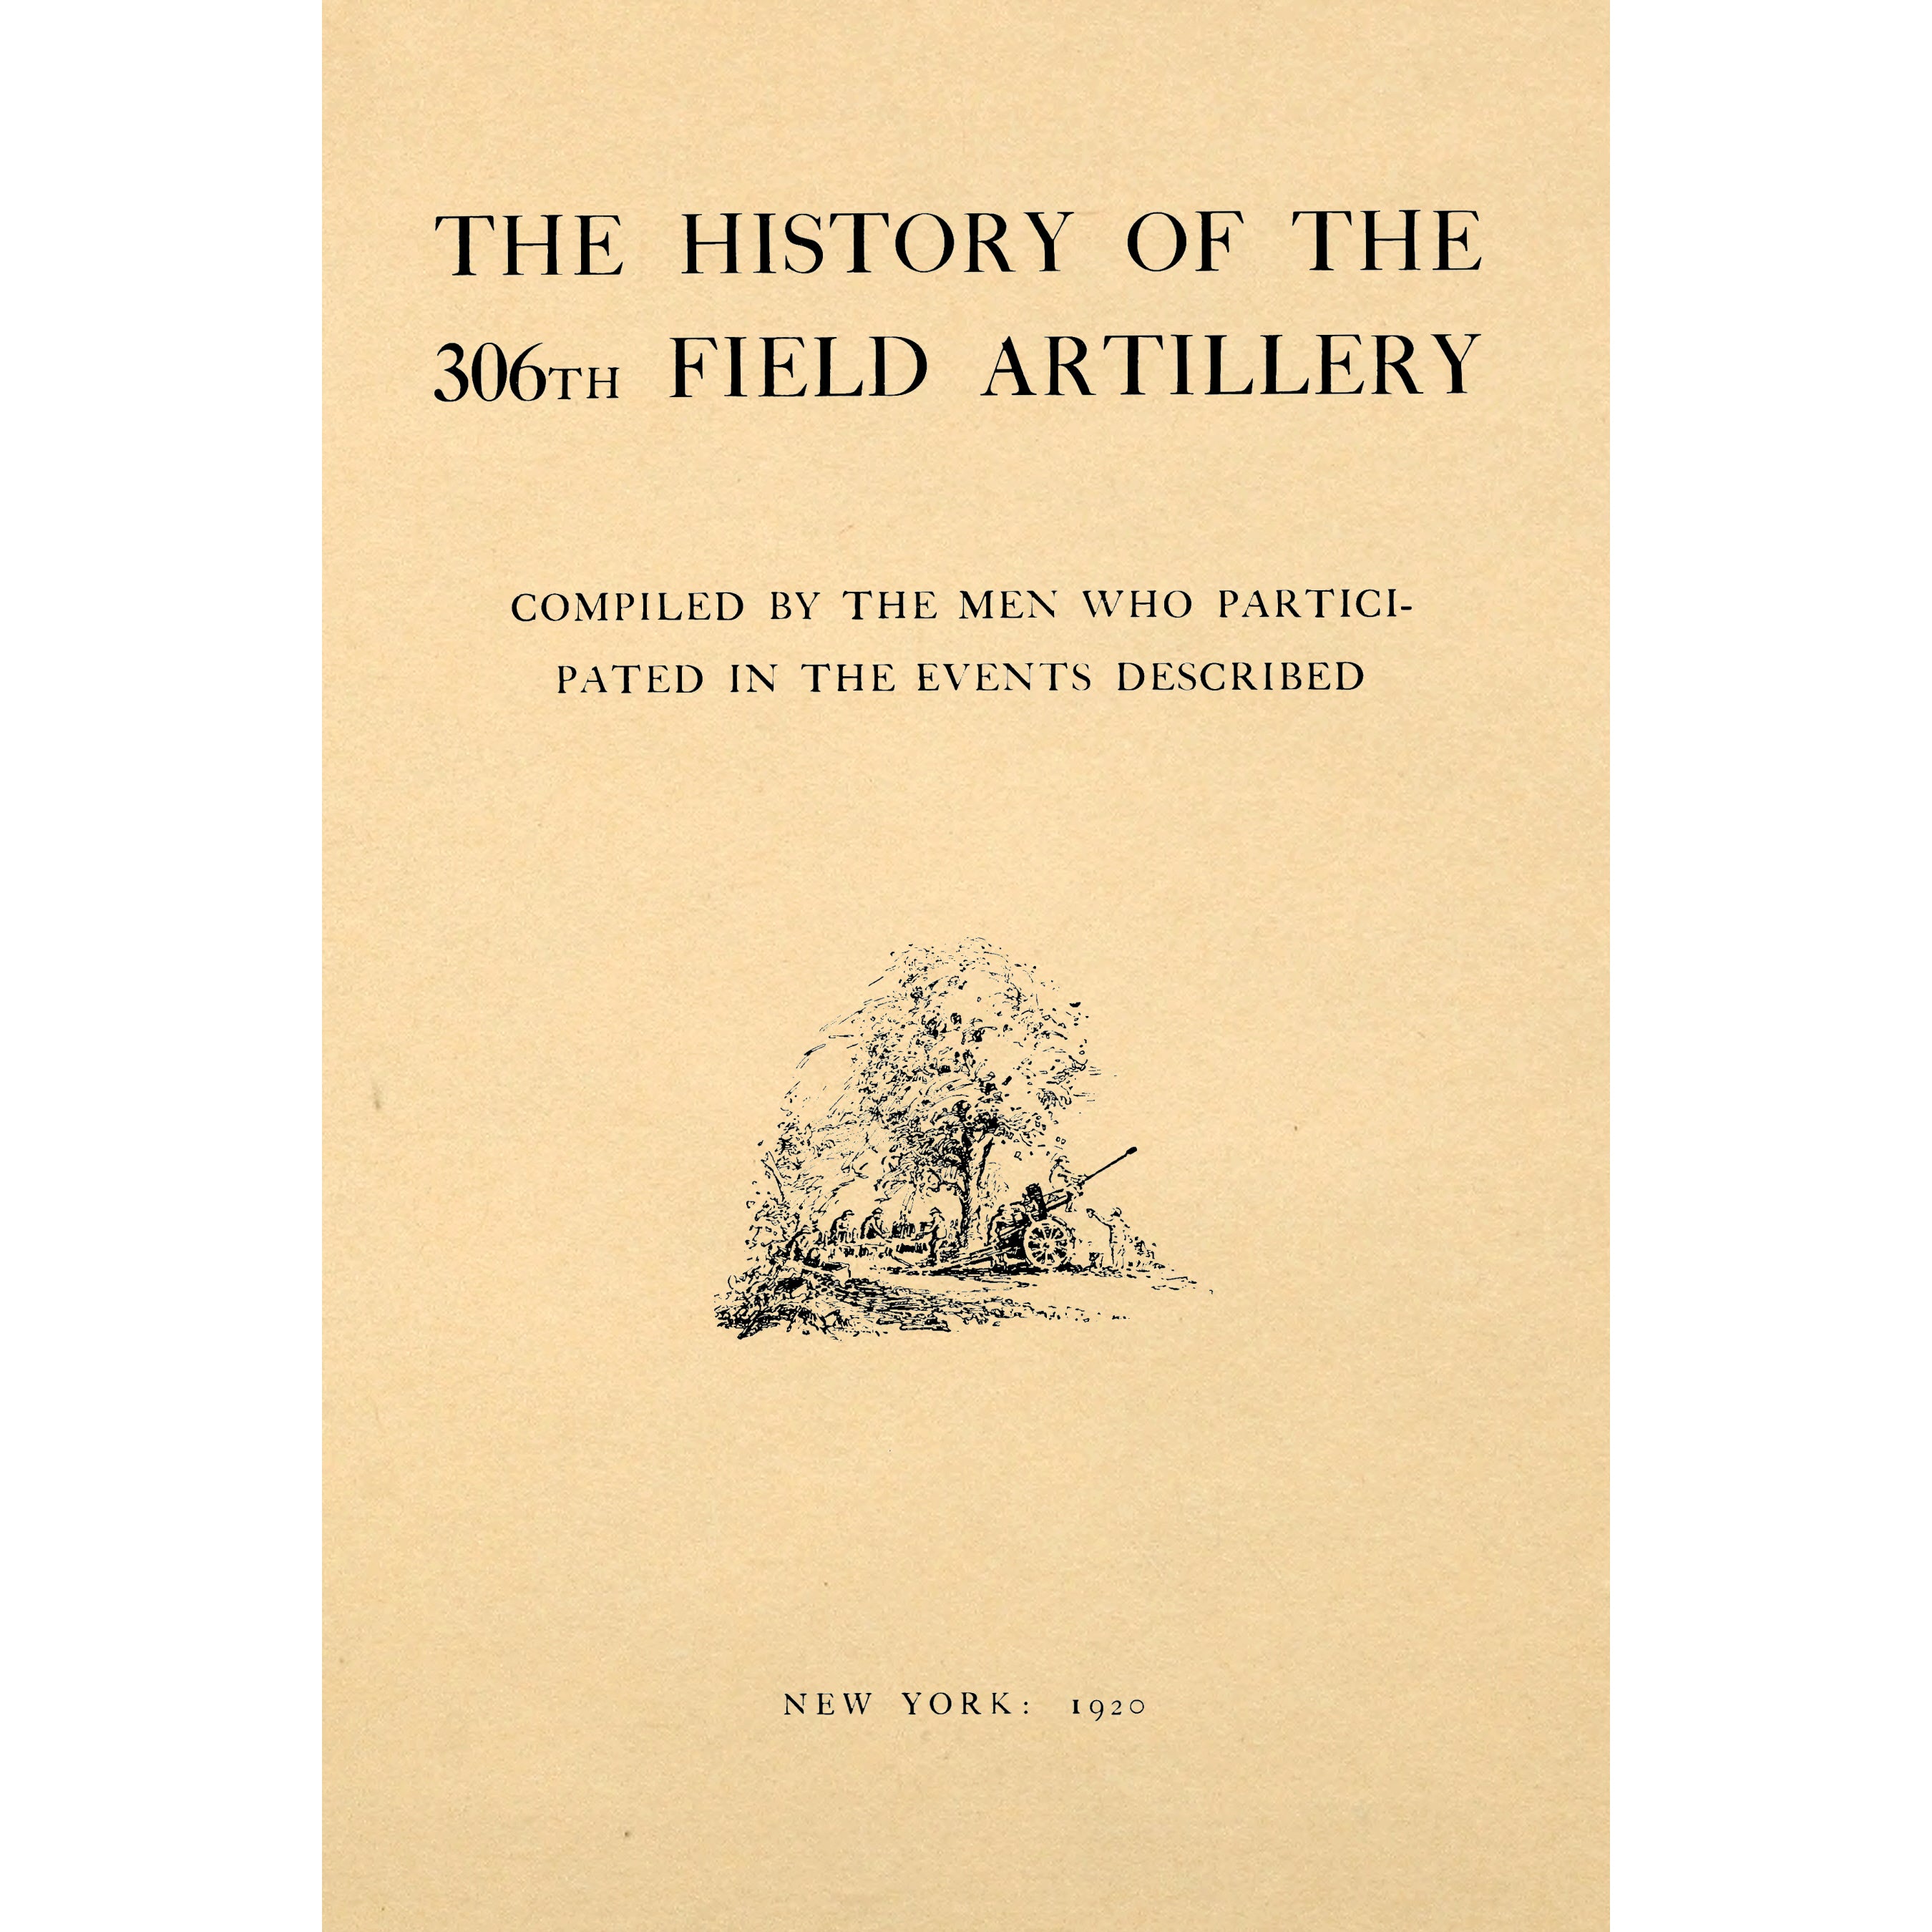 The history of the 306th field artillery